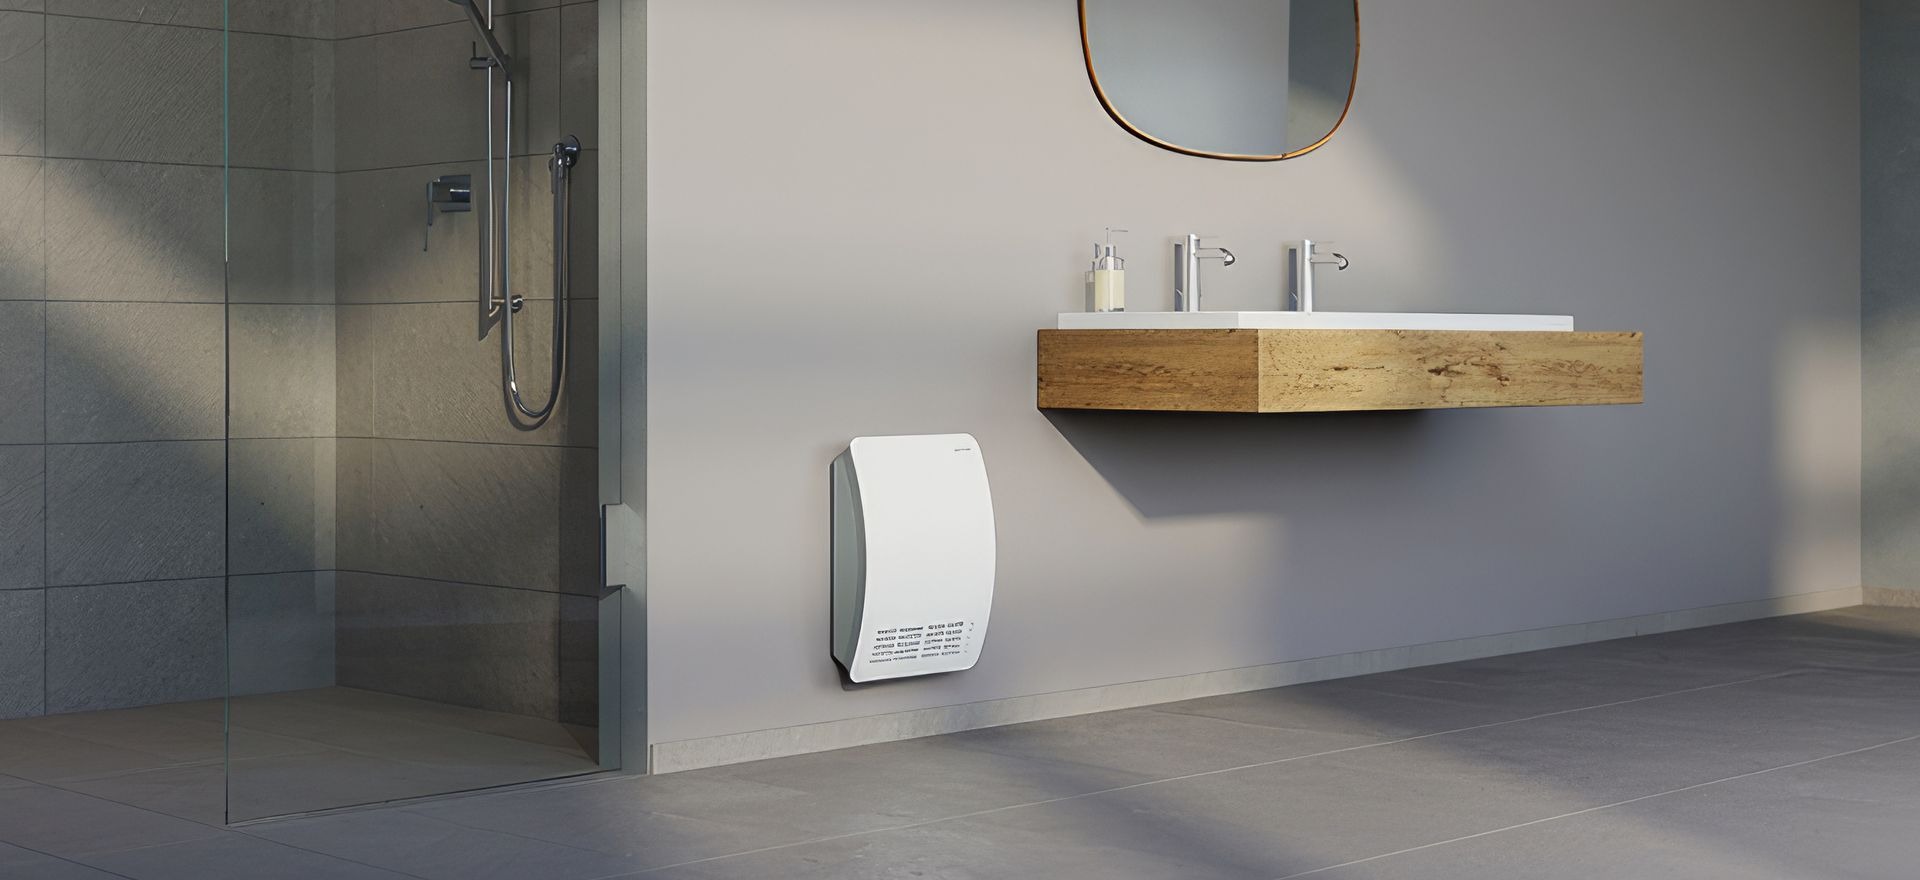 7 bathroom heating options and what they'll cost you to run